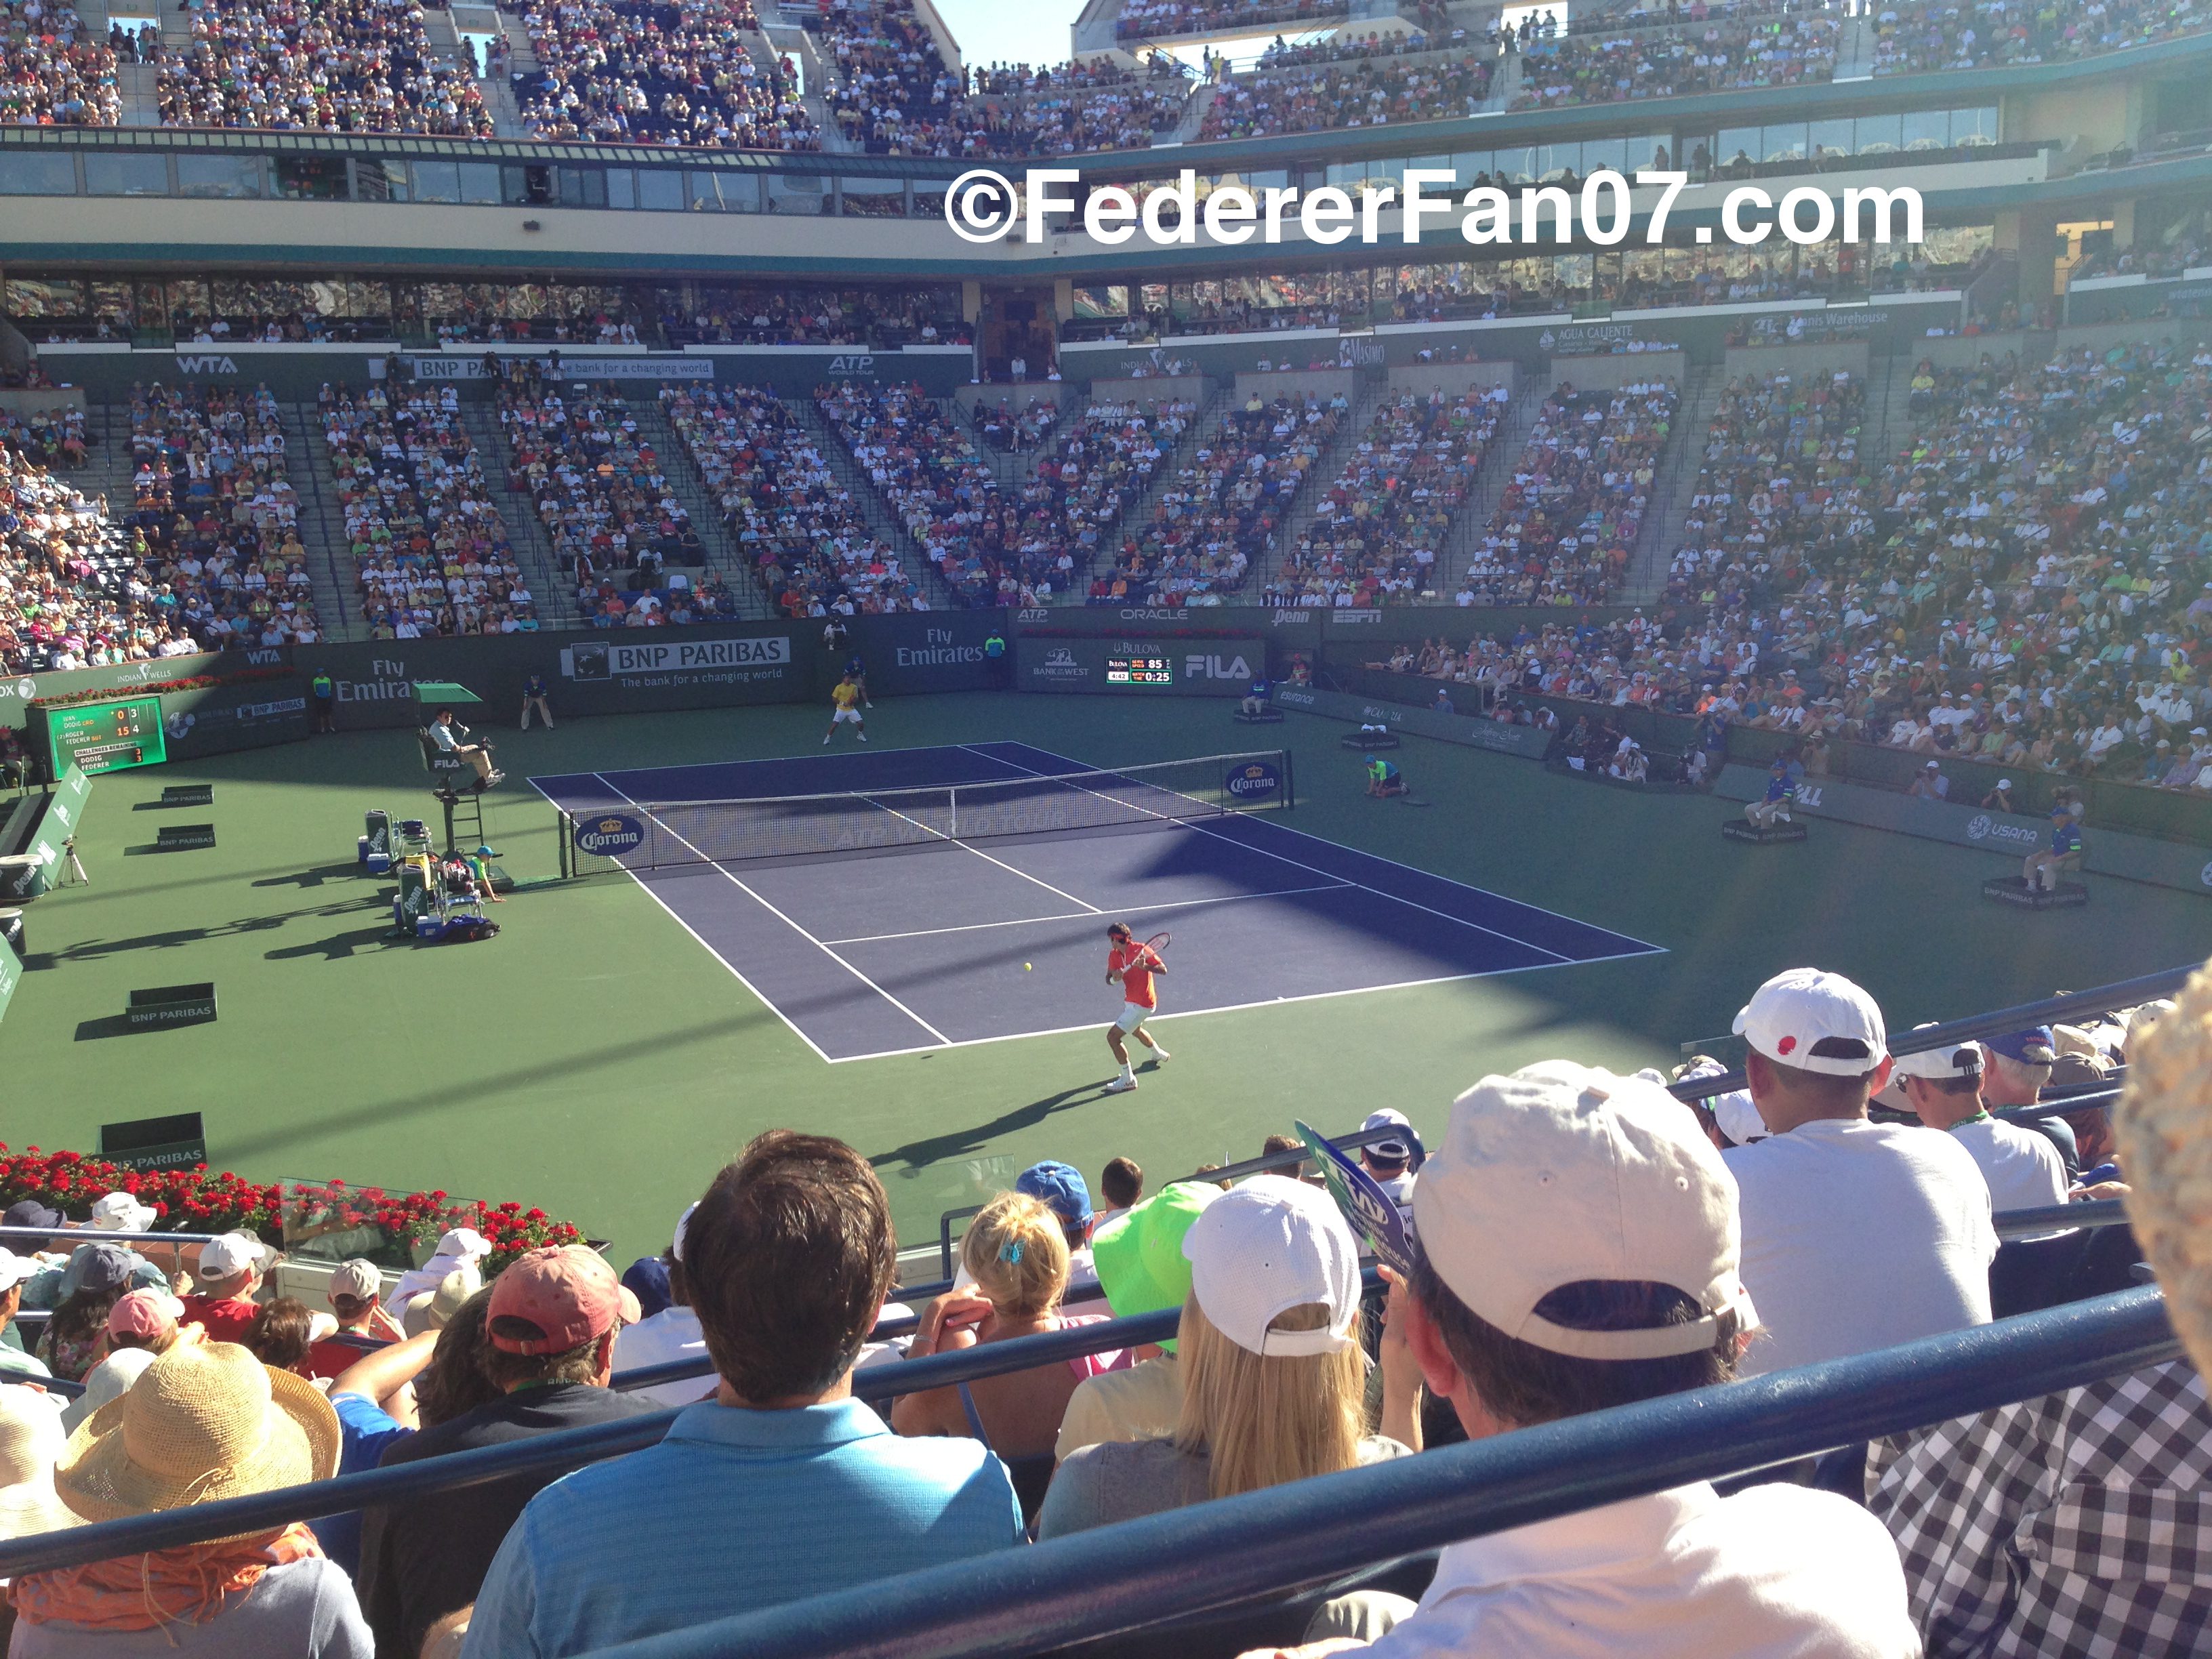 Roger Federer at 2013 BNP Paribas Open in Indian Wells. All photos and video taken by FedererFan07. Go to https://federerfan07.com for more.